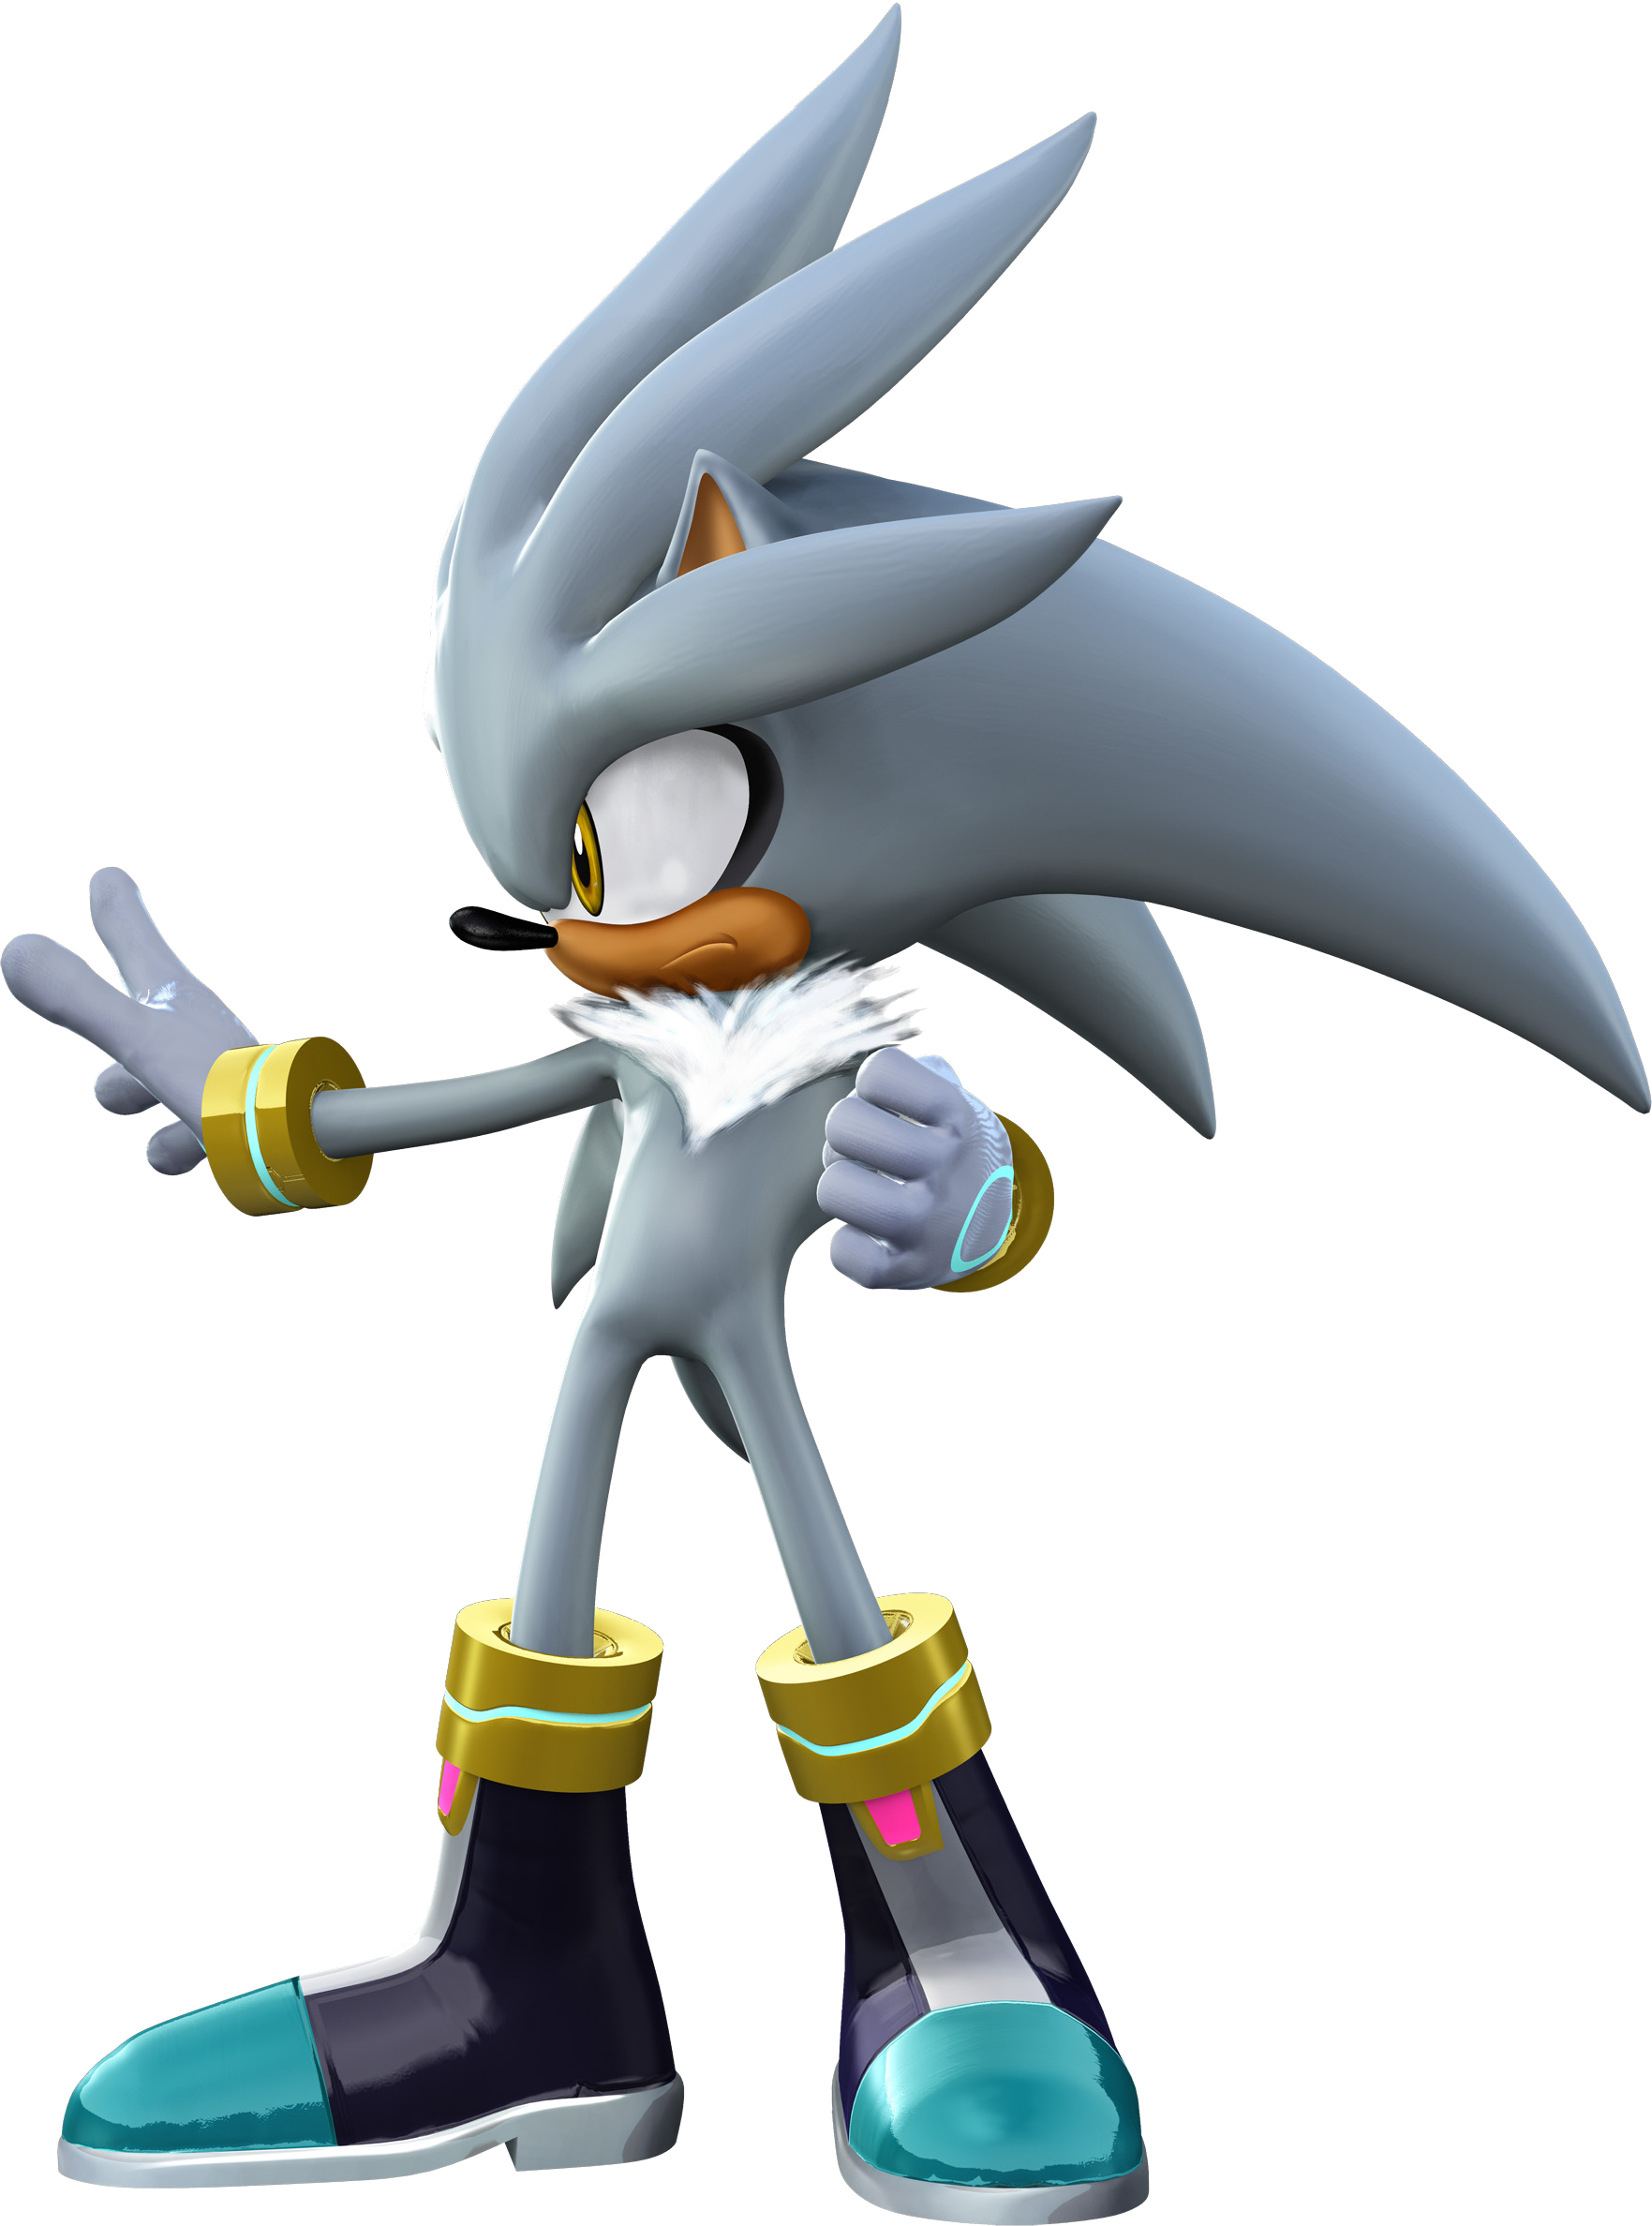 Click To Edit - Silver The Hedgehog Boots (1763x2375)